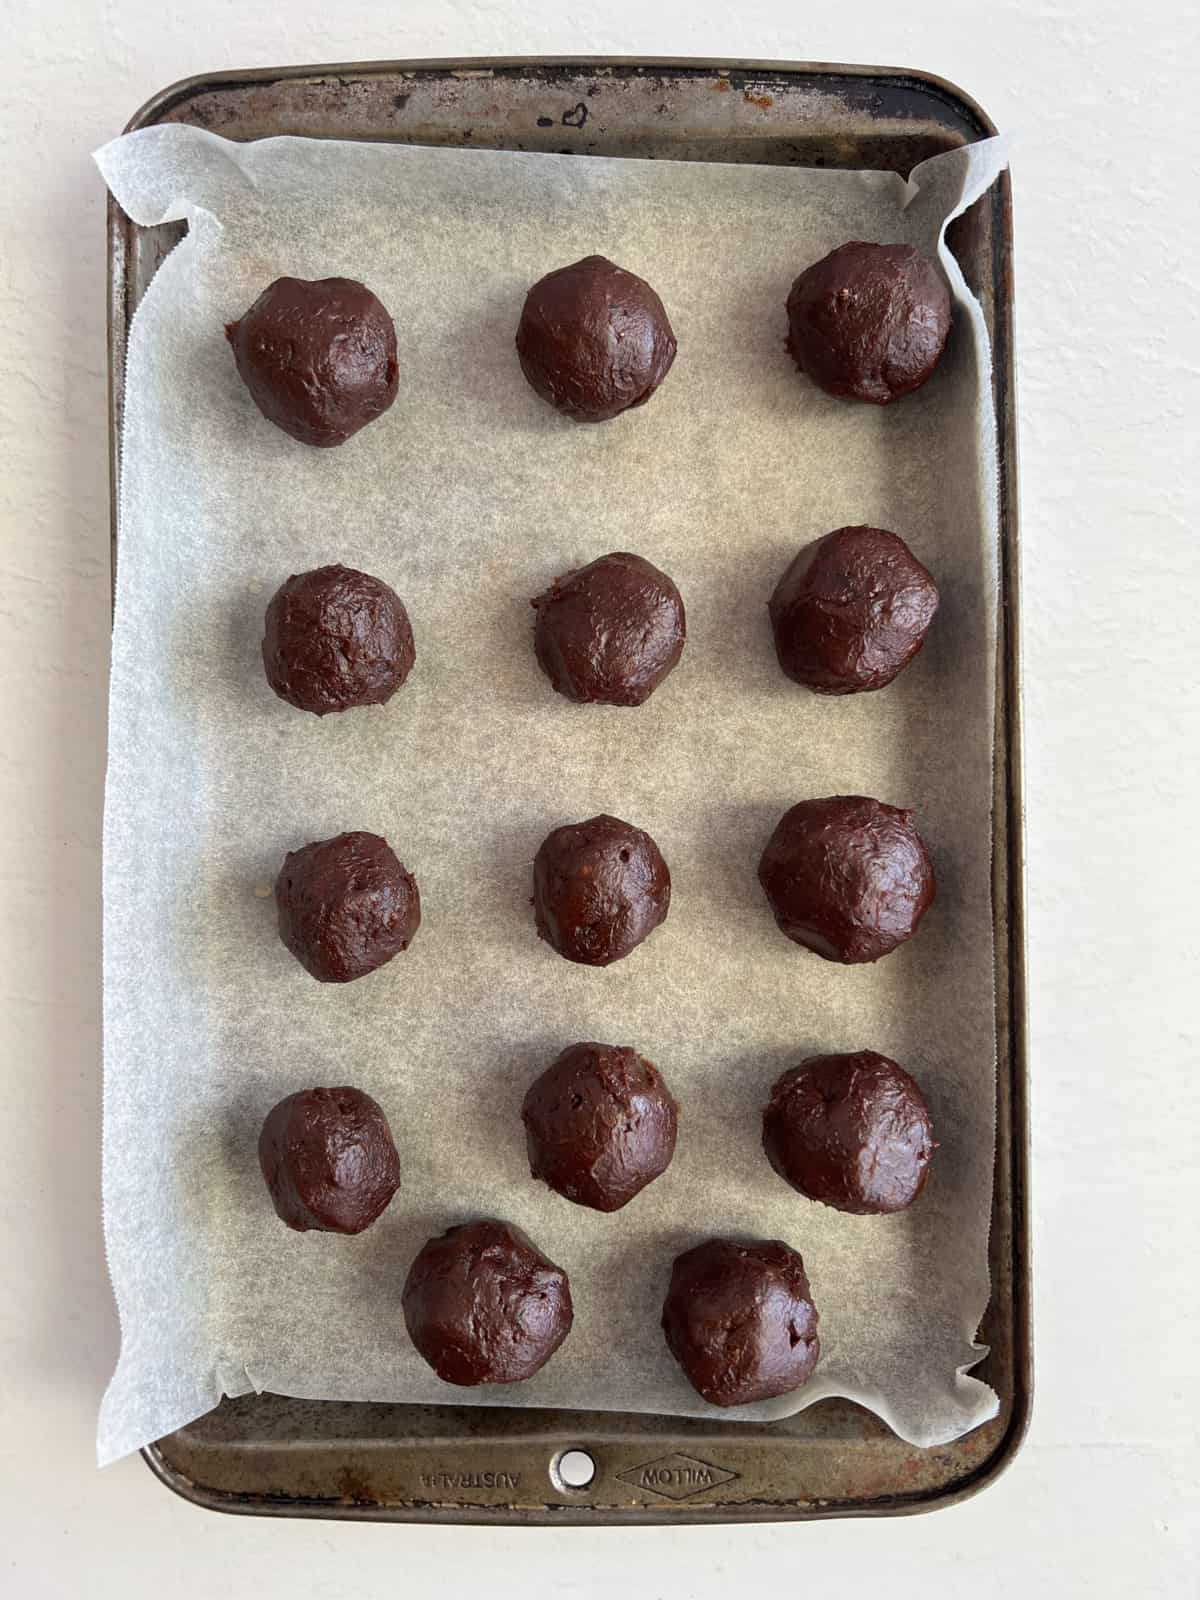 uncoated brown balls in a tray